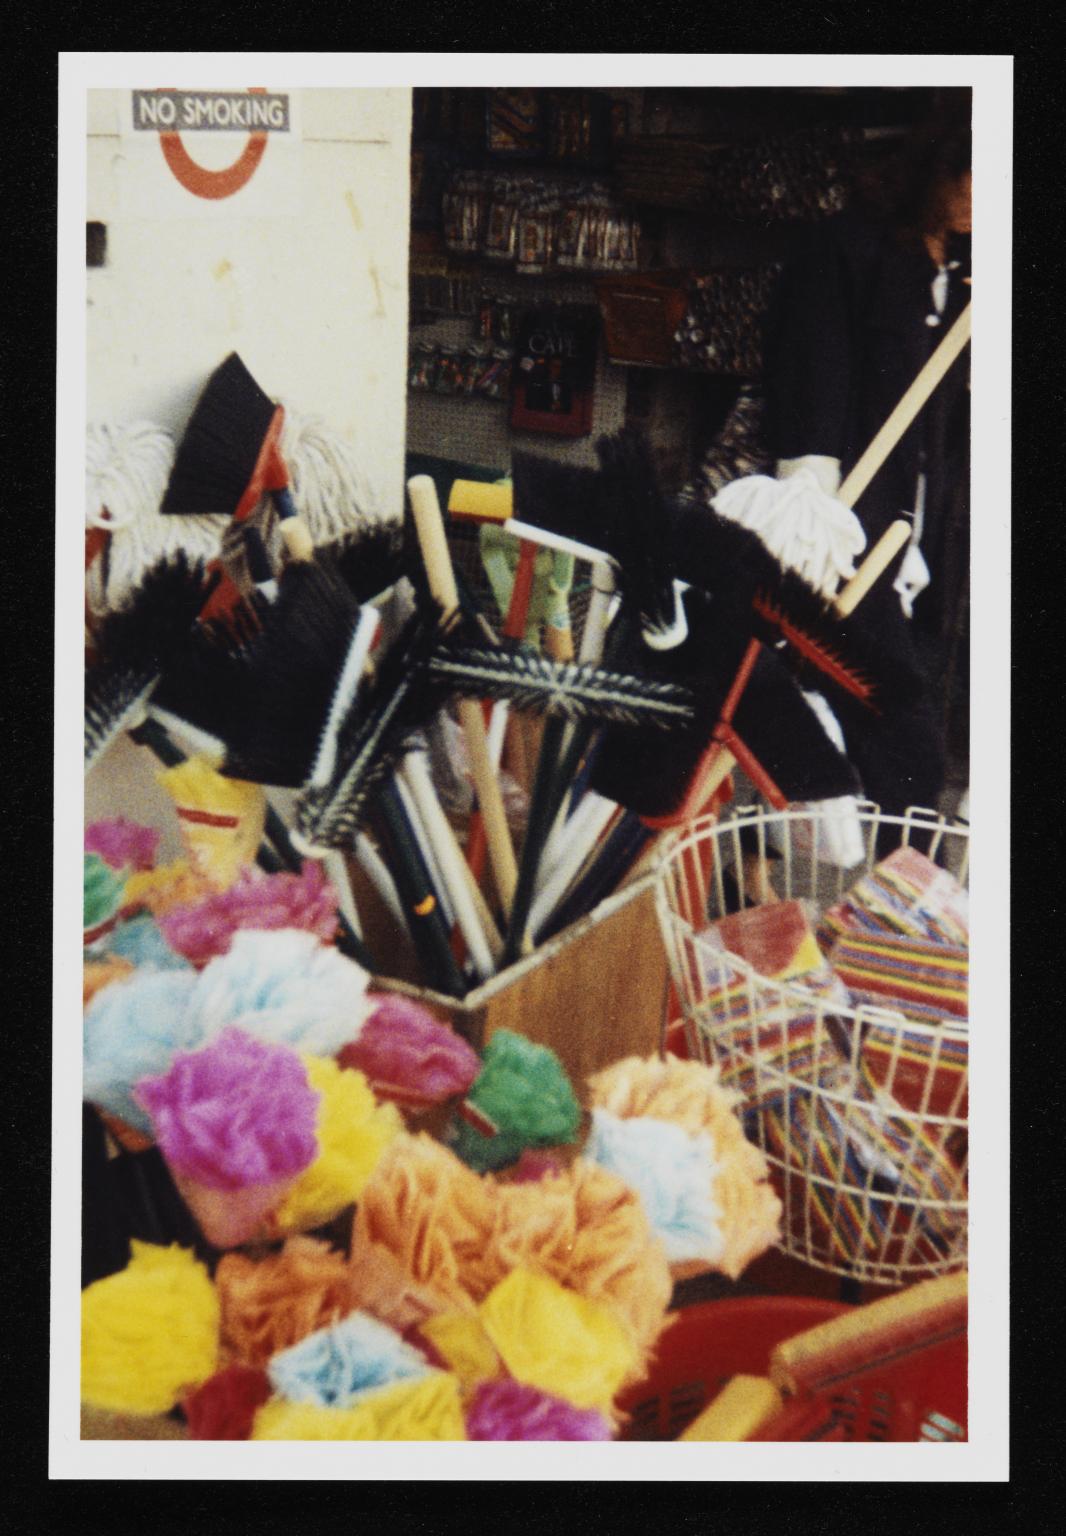 Plastic flowers, brooms, and sponges in boxes and buckets outside a shop